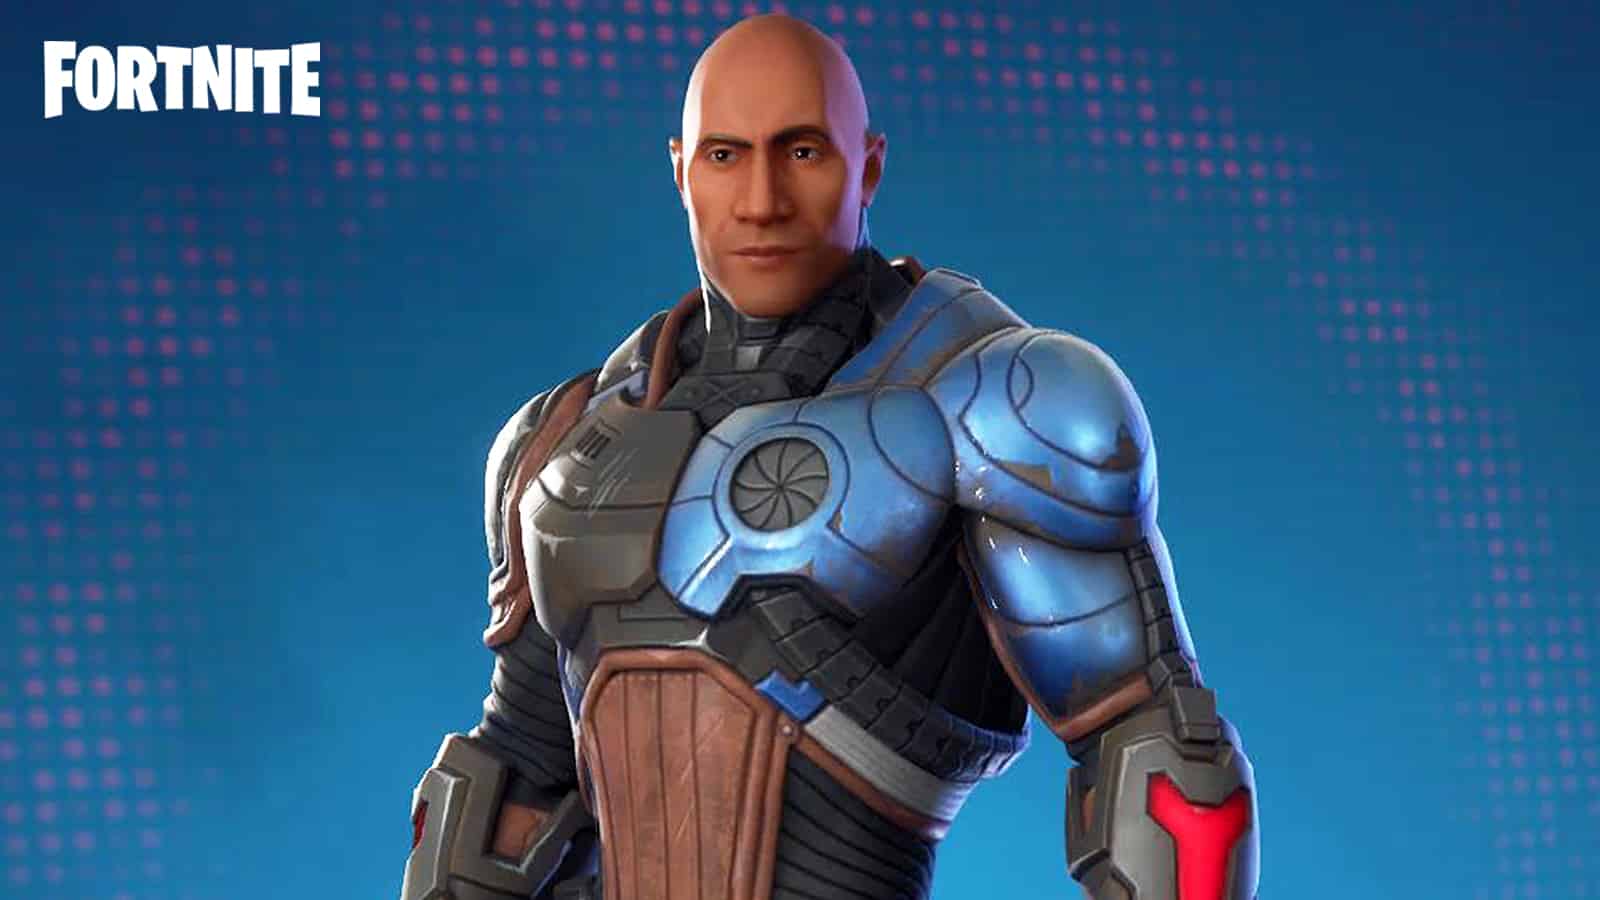 The Foundation Skin as a reward for completing Fortnite Foundation Quests